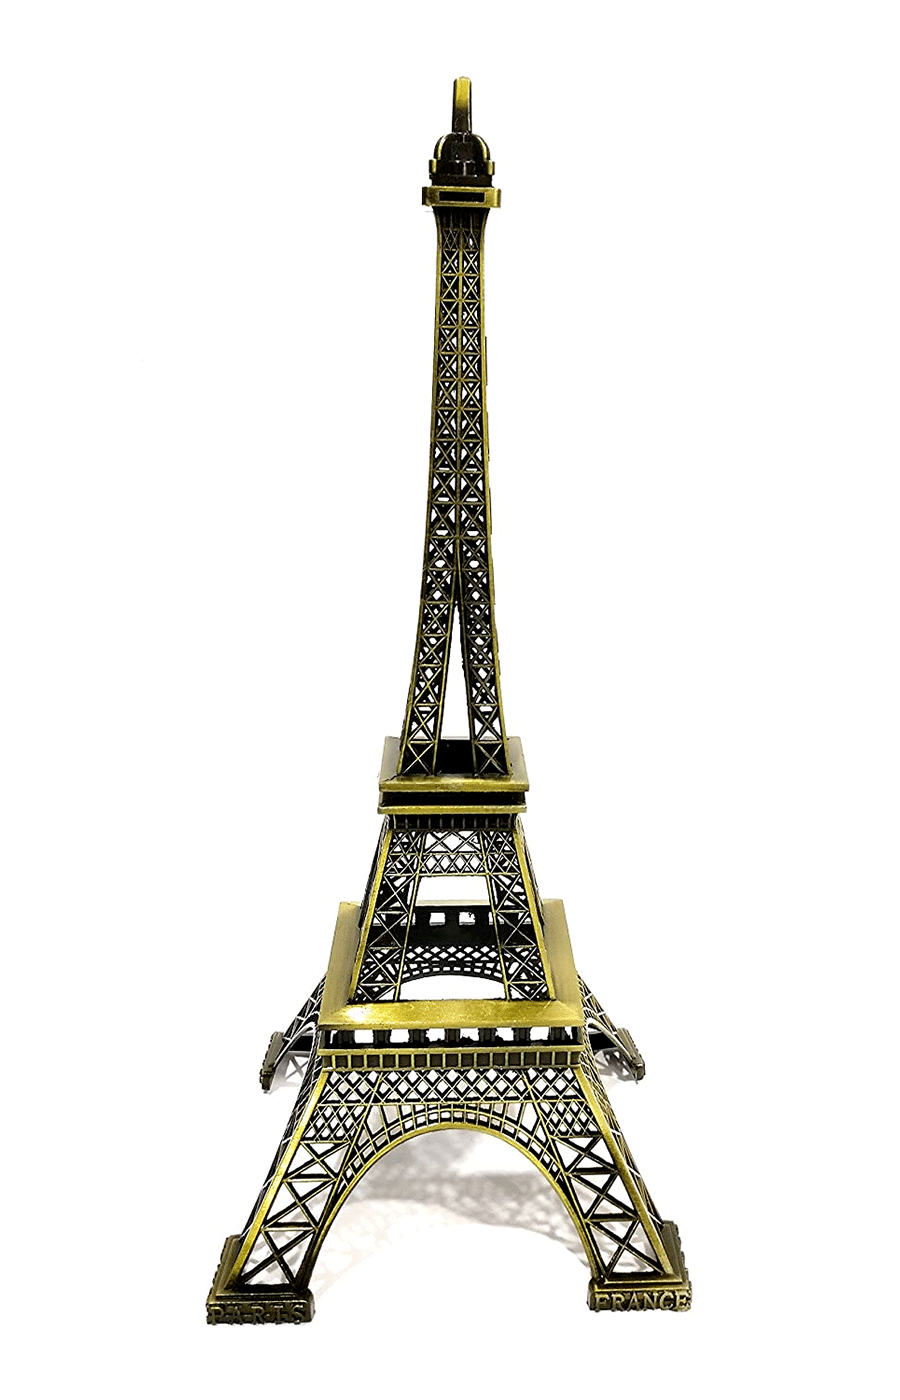 FunkyTradition 25 cm Tall Eiffel Tower Statue Metal Showpiece | Birthday Anniversary Gift and Home Office Decor 9.9" Tall